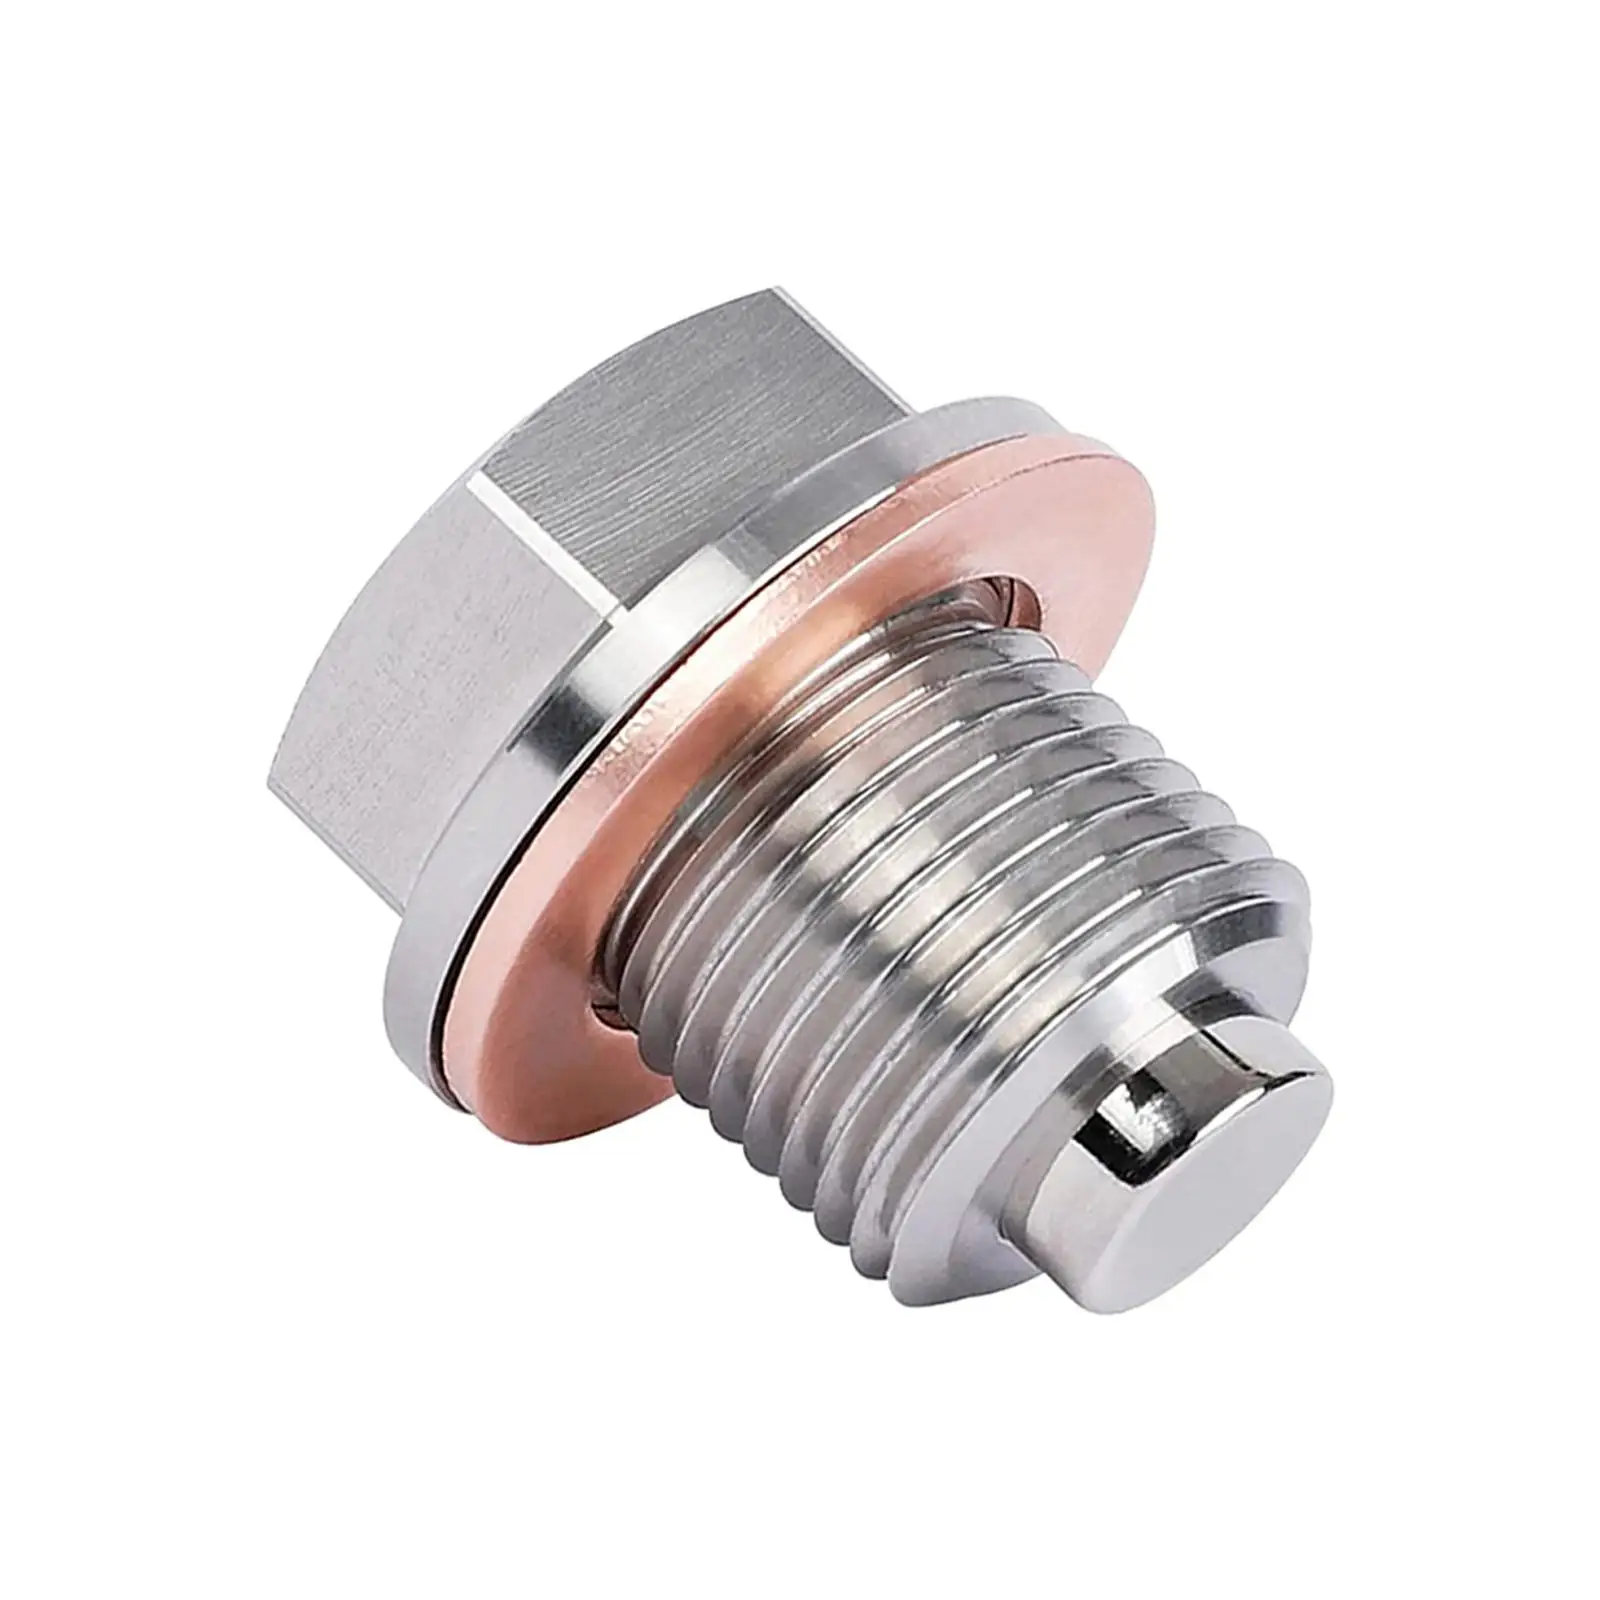 Magnetic Oil Drain Plug M16x1.5 Replace Anti Vibration Heavy Duty Easy to Install Accessories Sump Drain Nut for Motorcycle